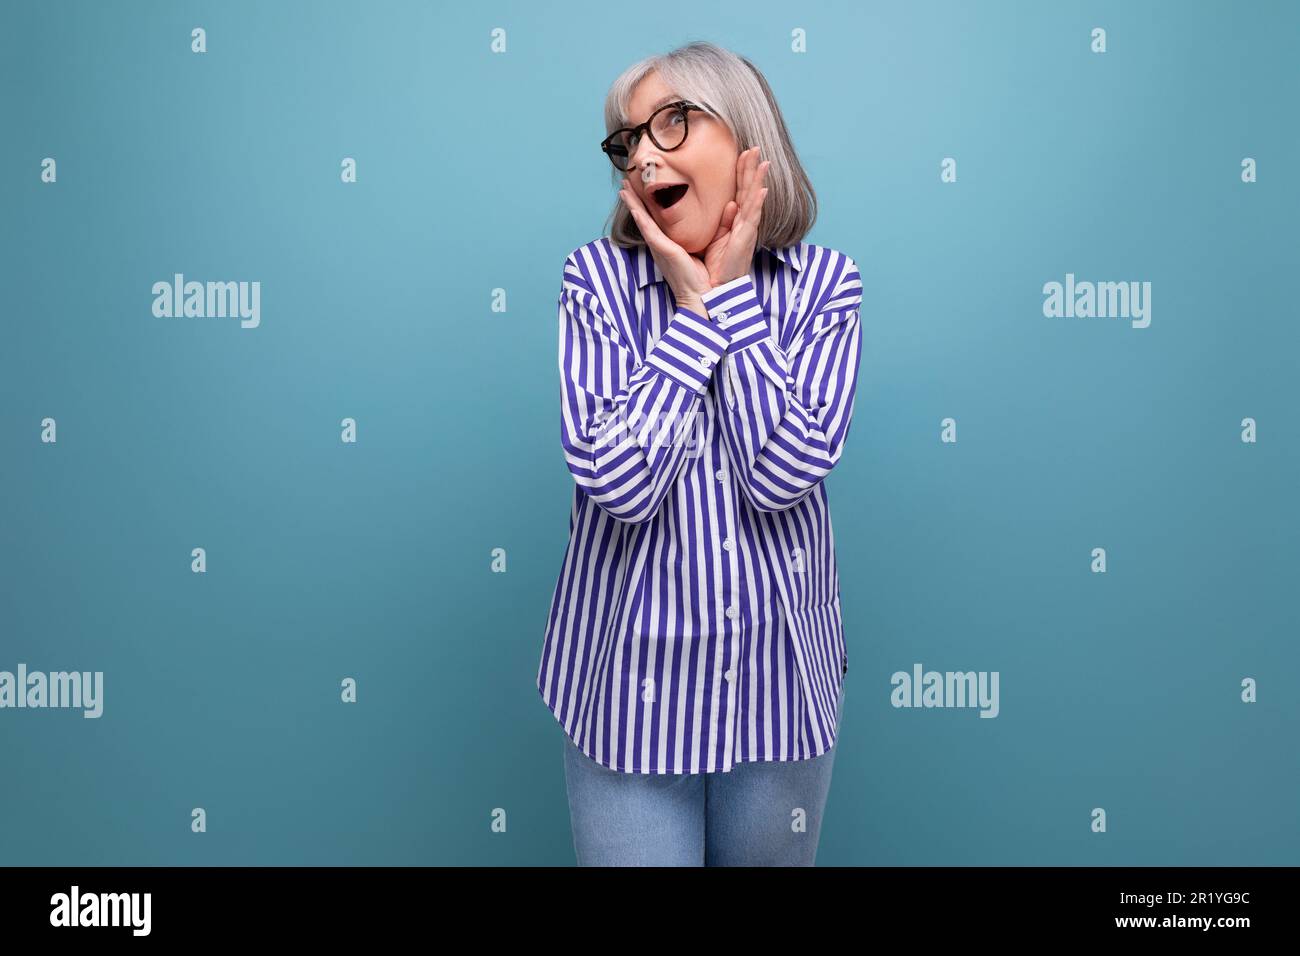 surprised middle-aged youth lady with gray hair on a bright studio background with copy space Stock Photo